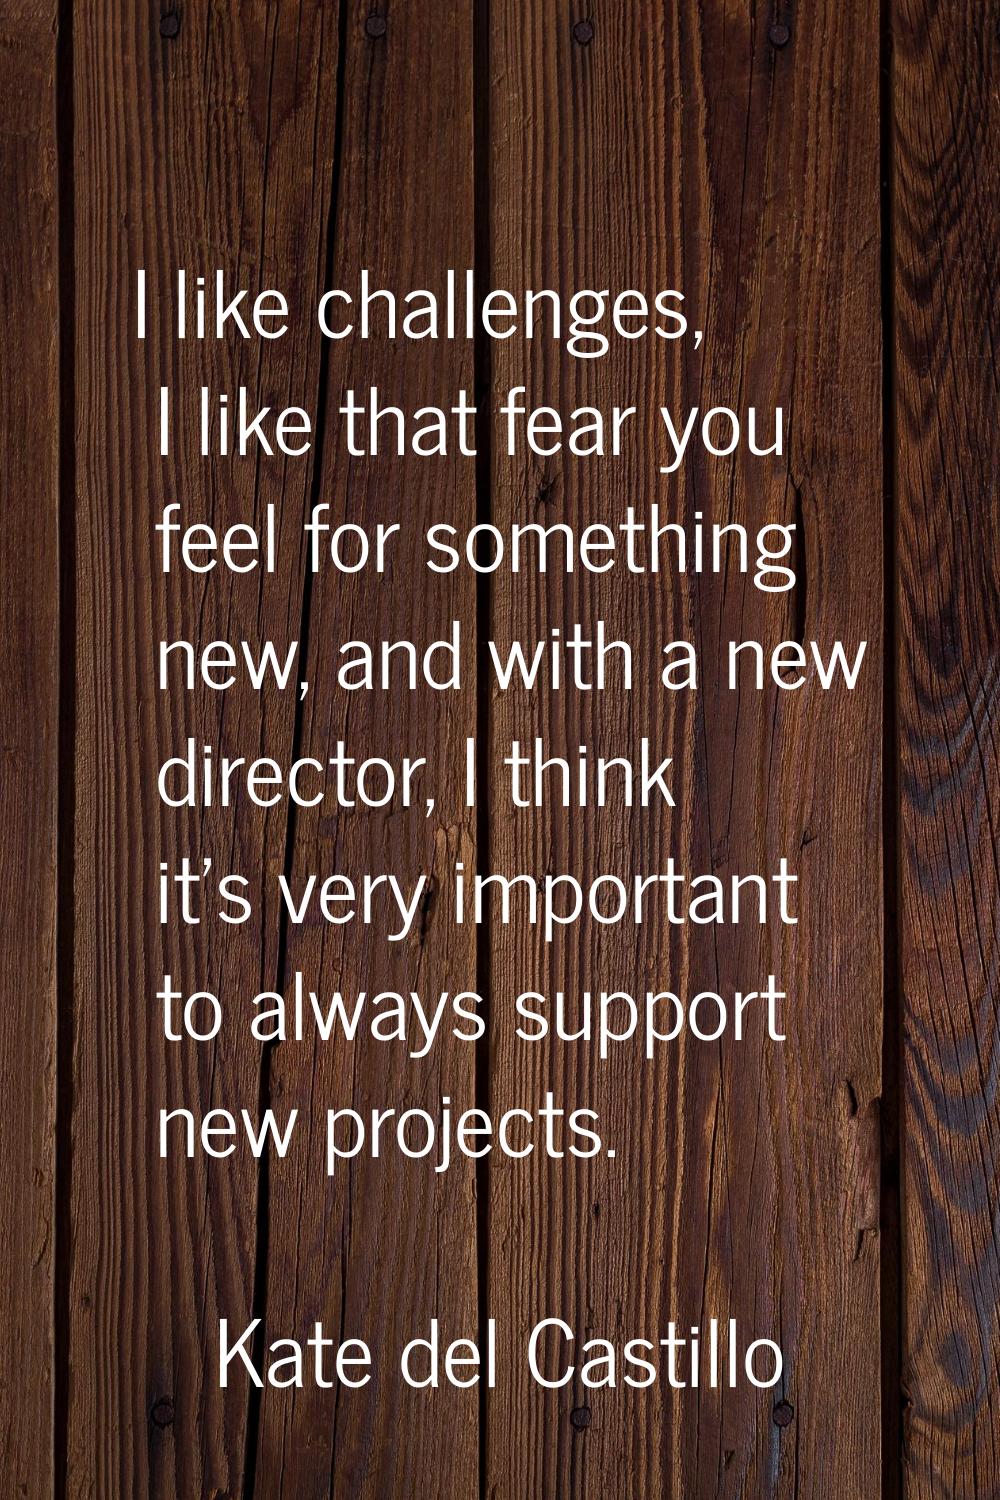 I like challenges, I like that fear you feel for something new, and with a new director, I think it